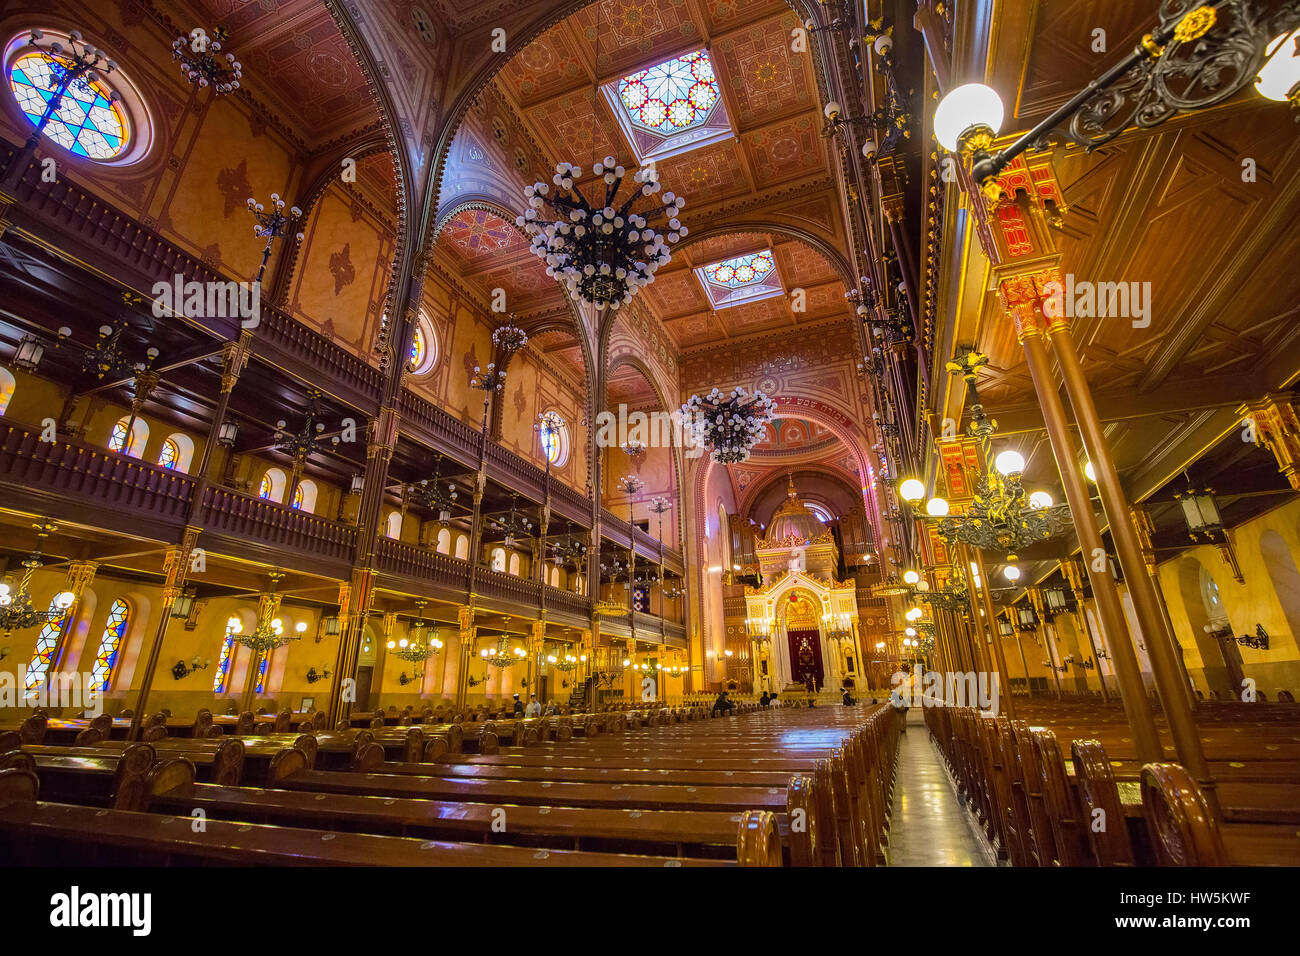 Interior of the Dohány Street or Great Jewish Synagogue nagy zsinagóga. The Second largest Synagogue in the world built in Moorish Revival Style. Buda Stock Photo